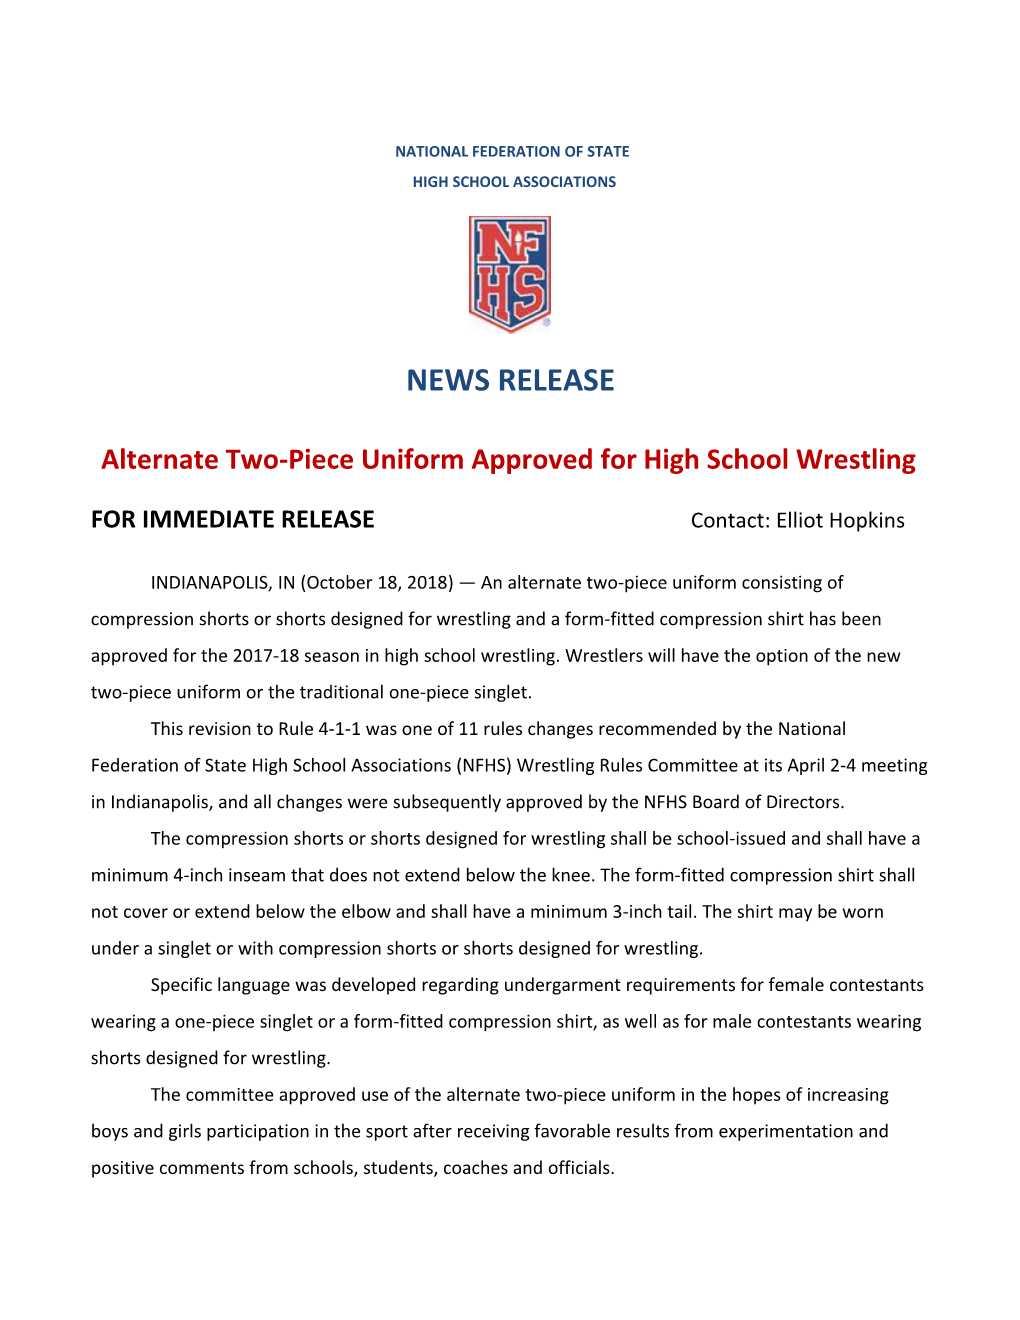 Alternate Two-Piece Uniform Approved for High School Wrestling